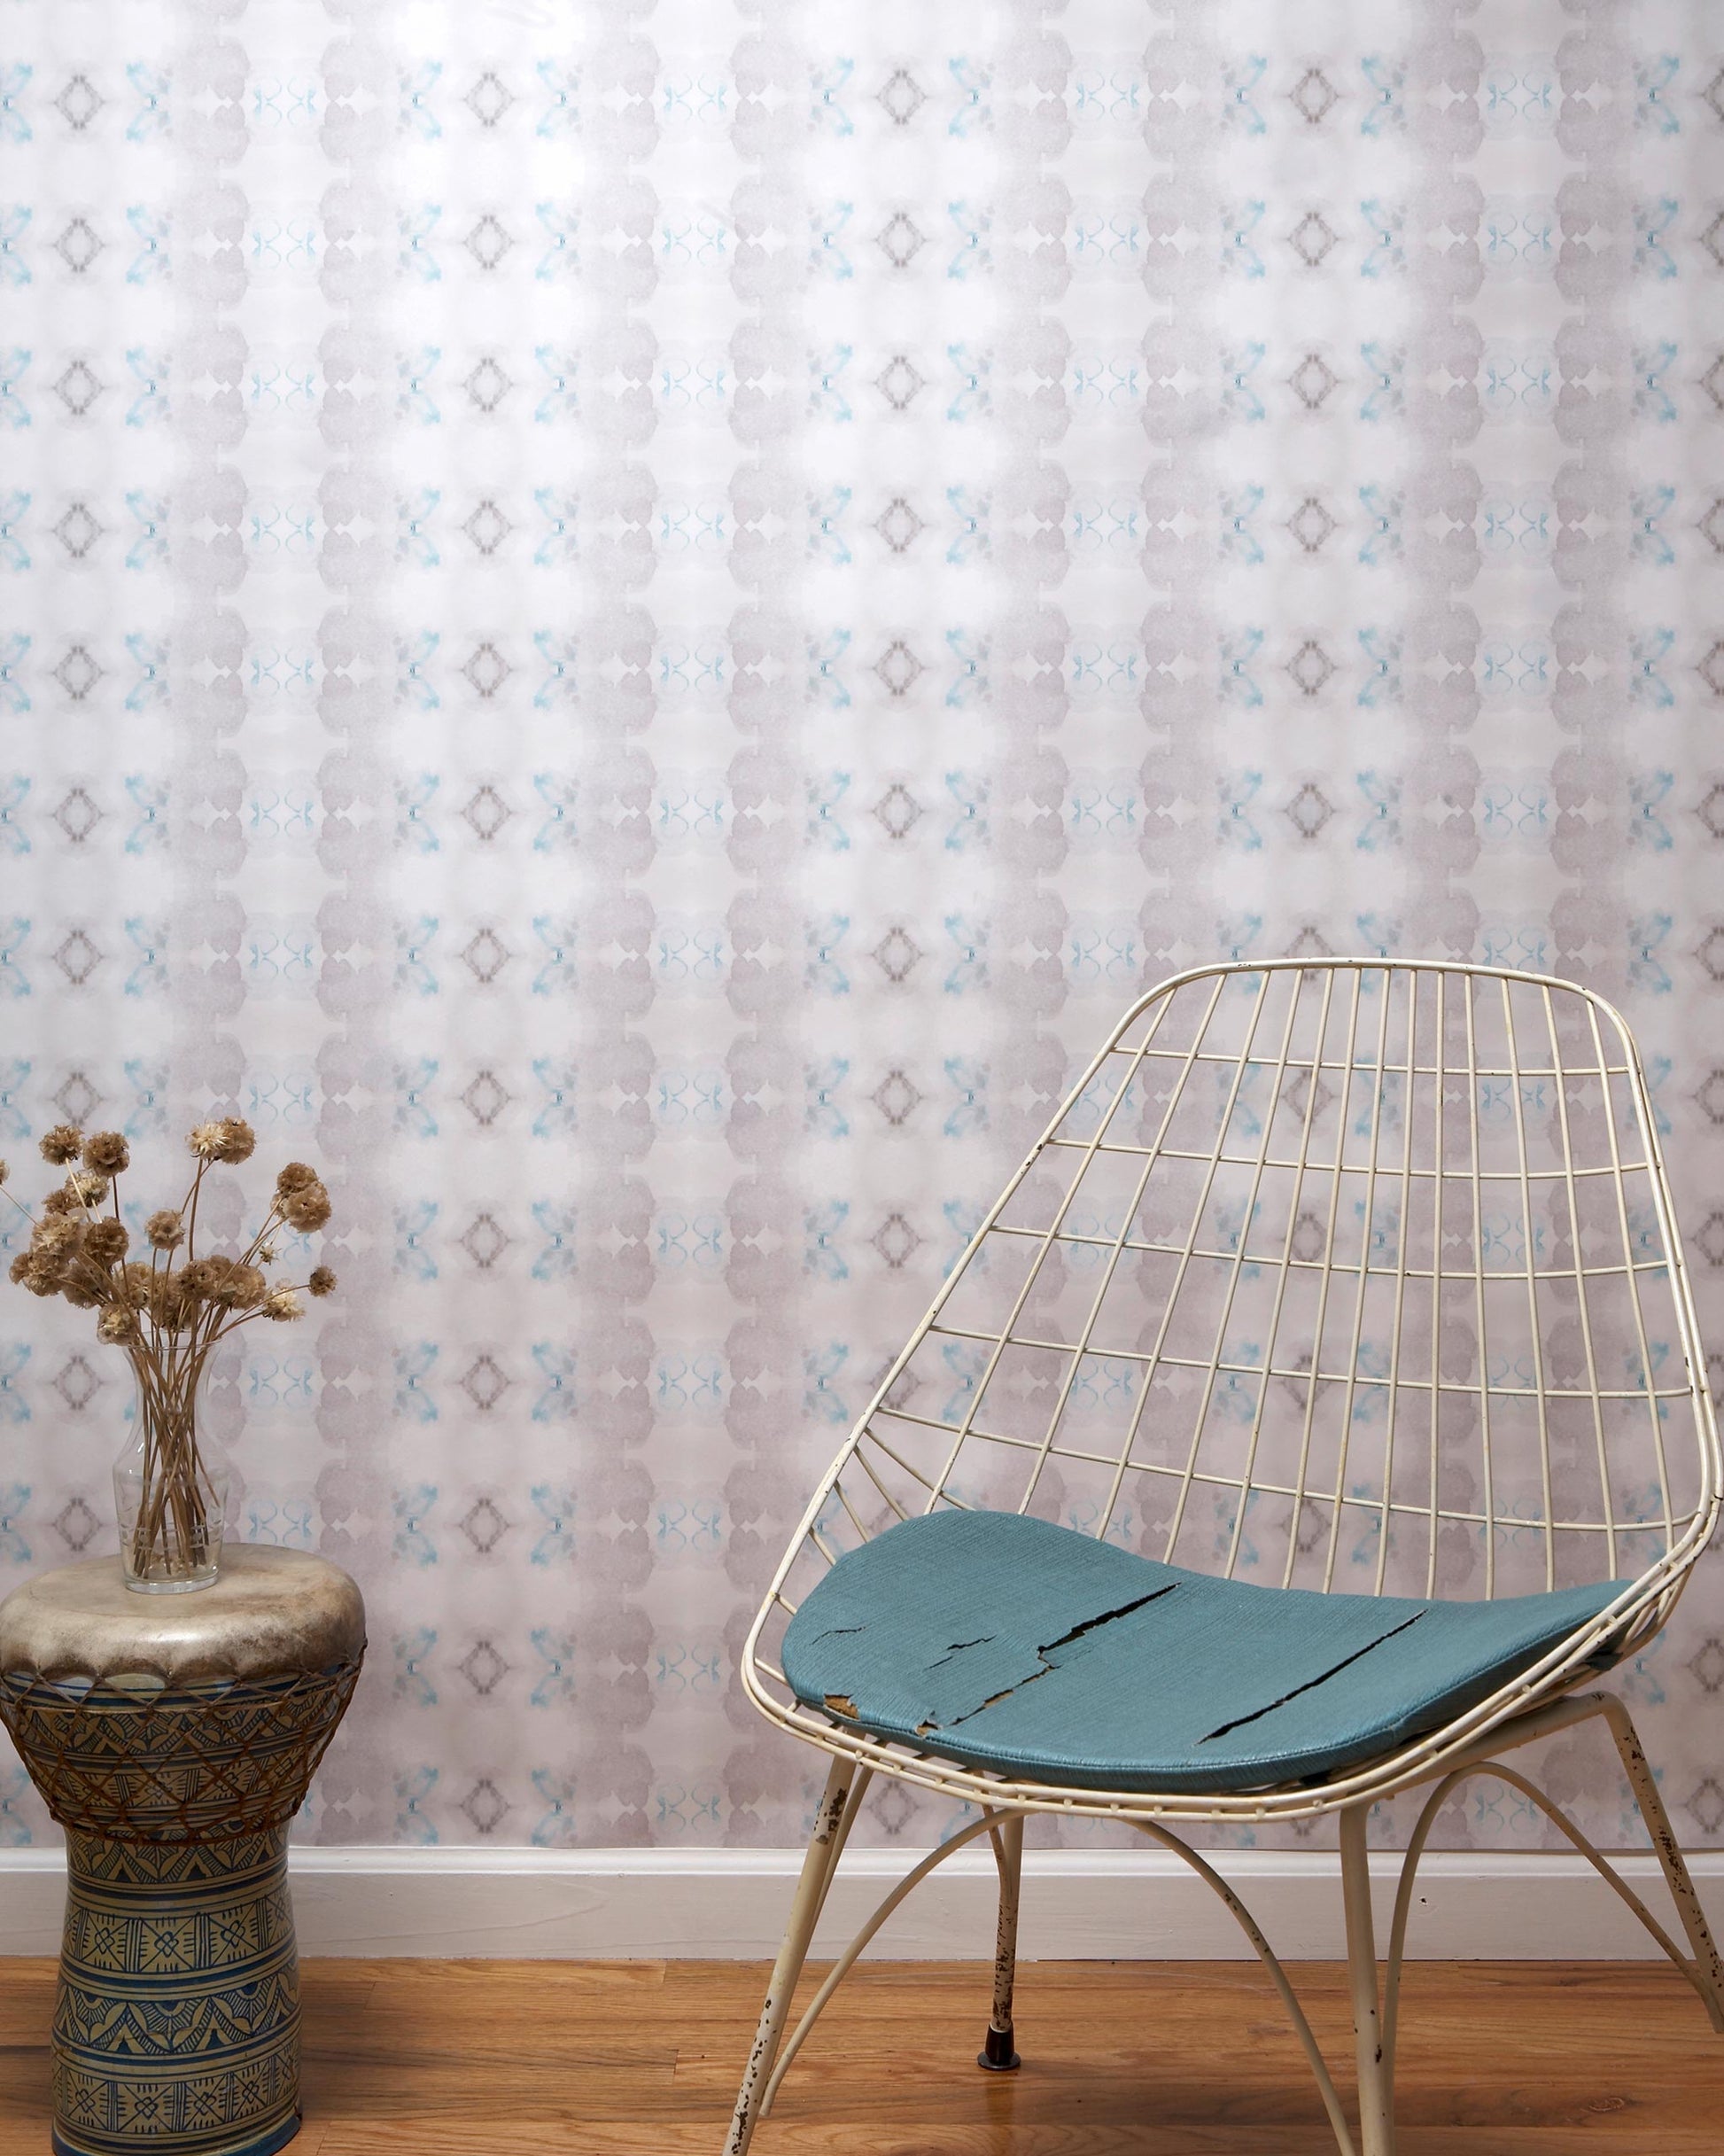 A luxurious Icelandic Mist Wallpaper sits in front of a Sea Green chair